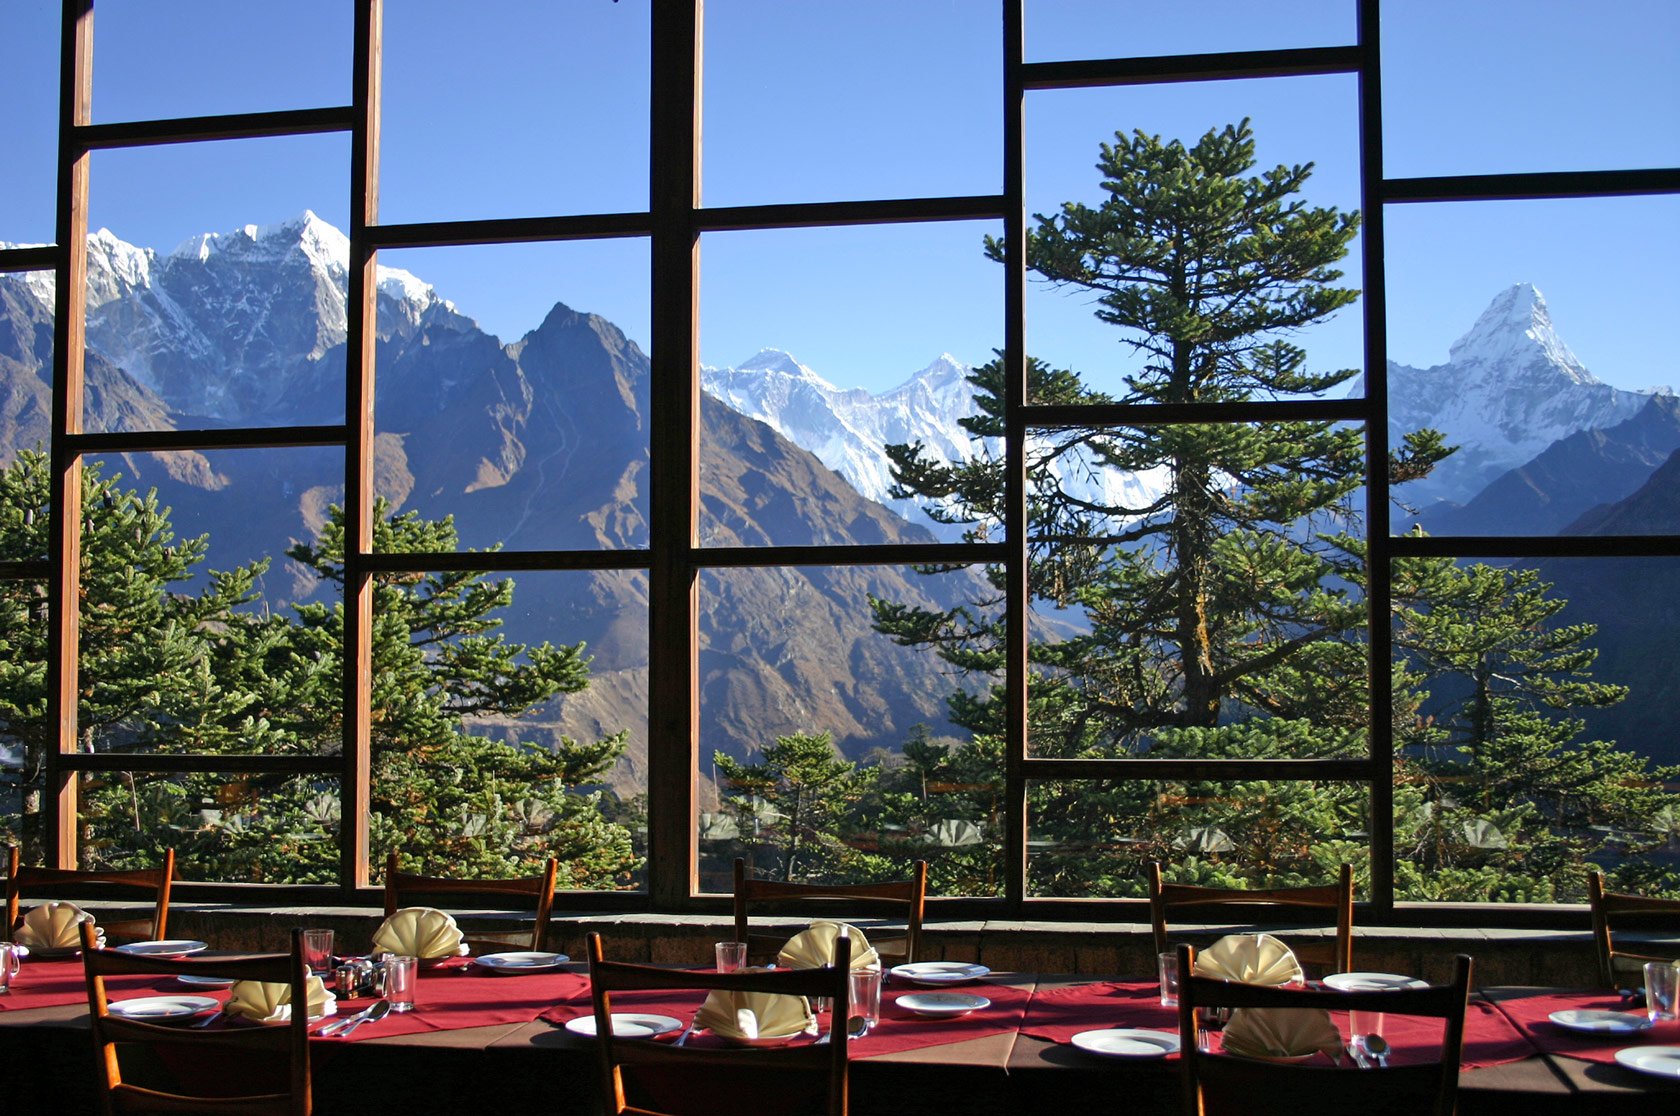 Views from the Everest View Hotel